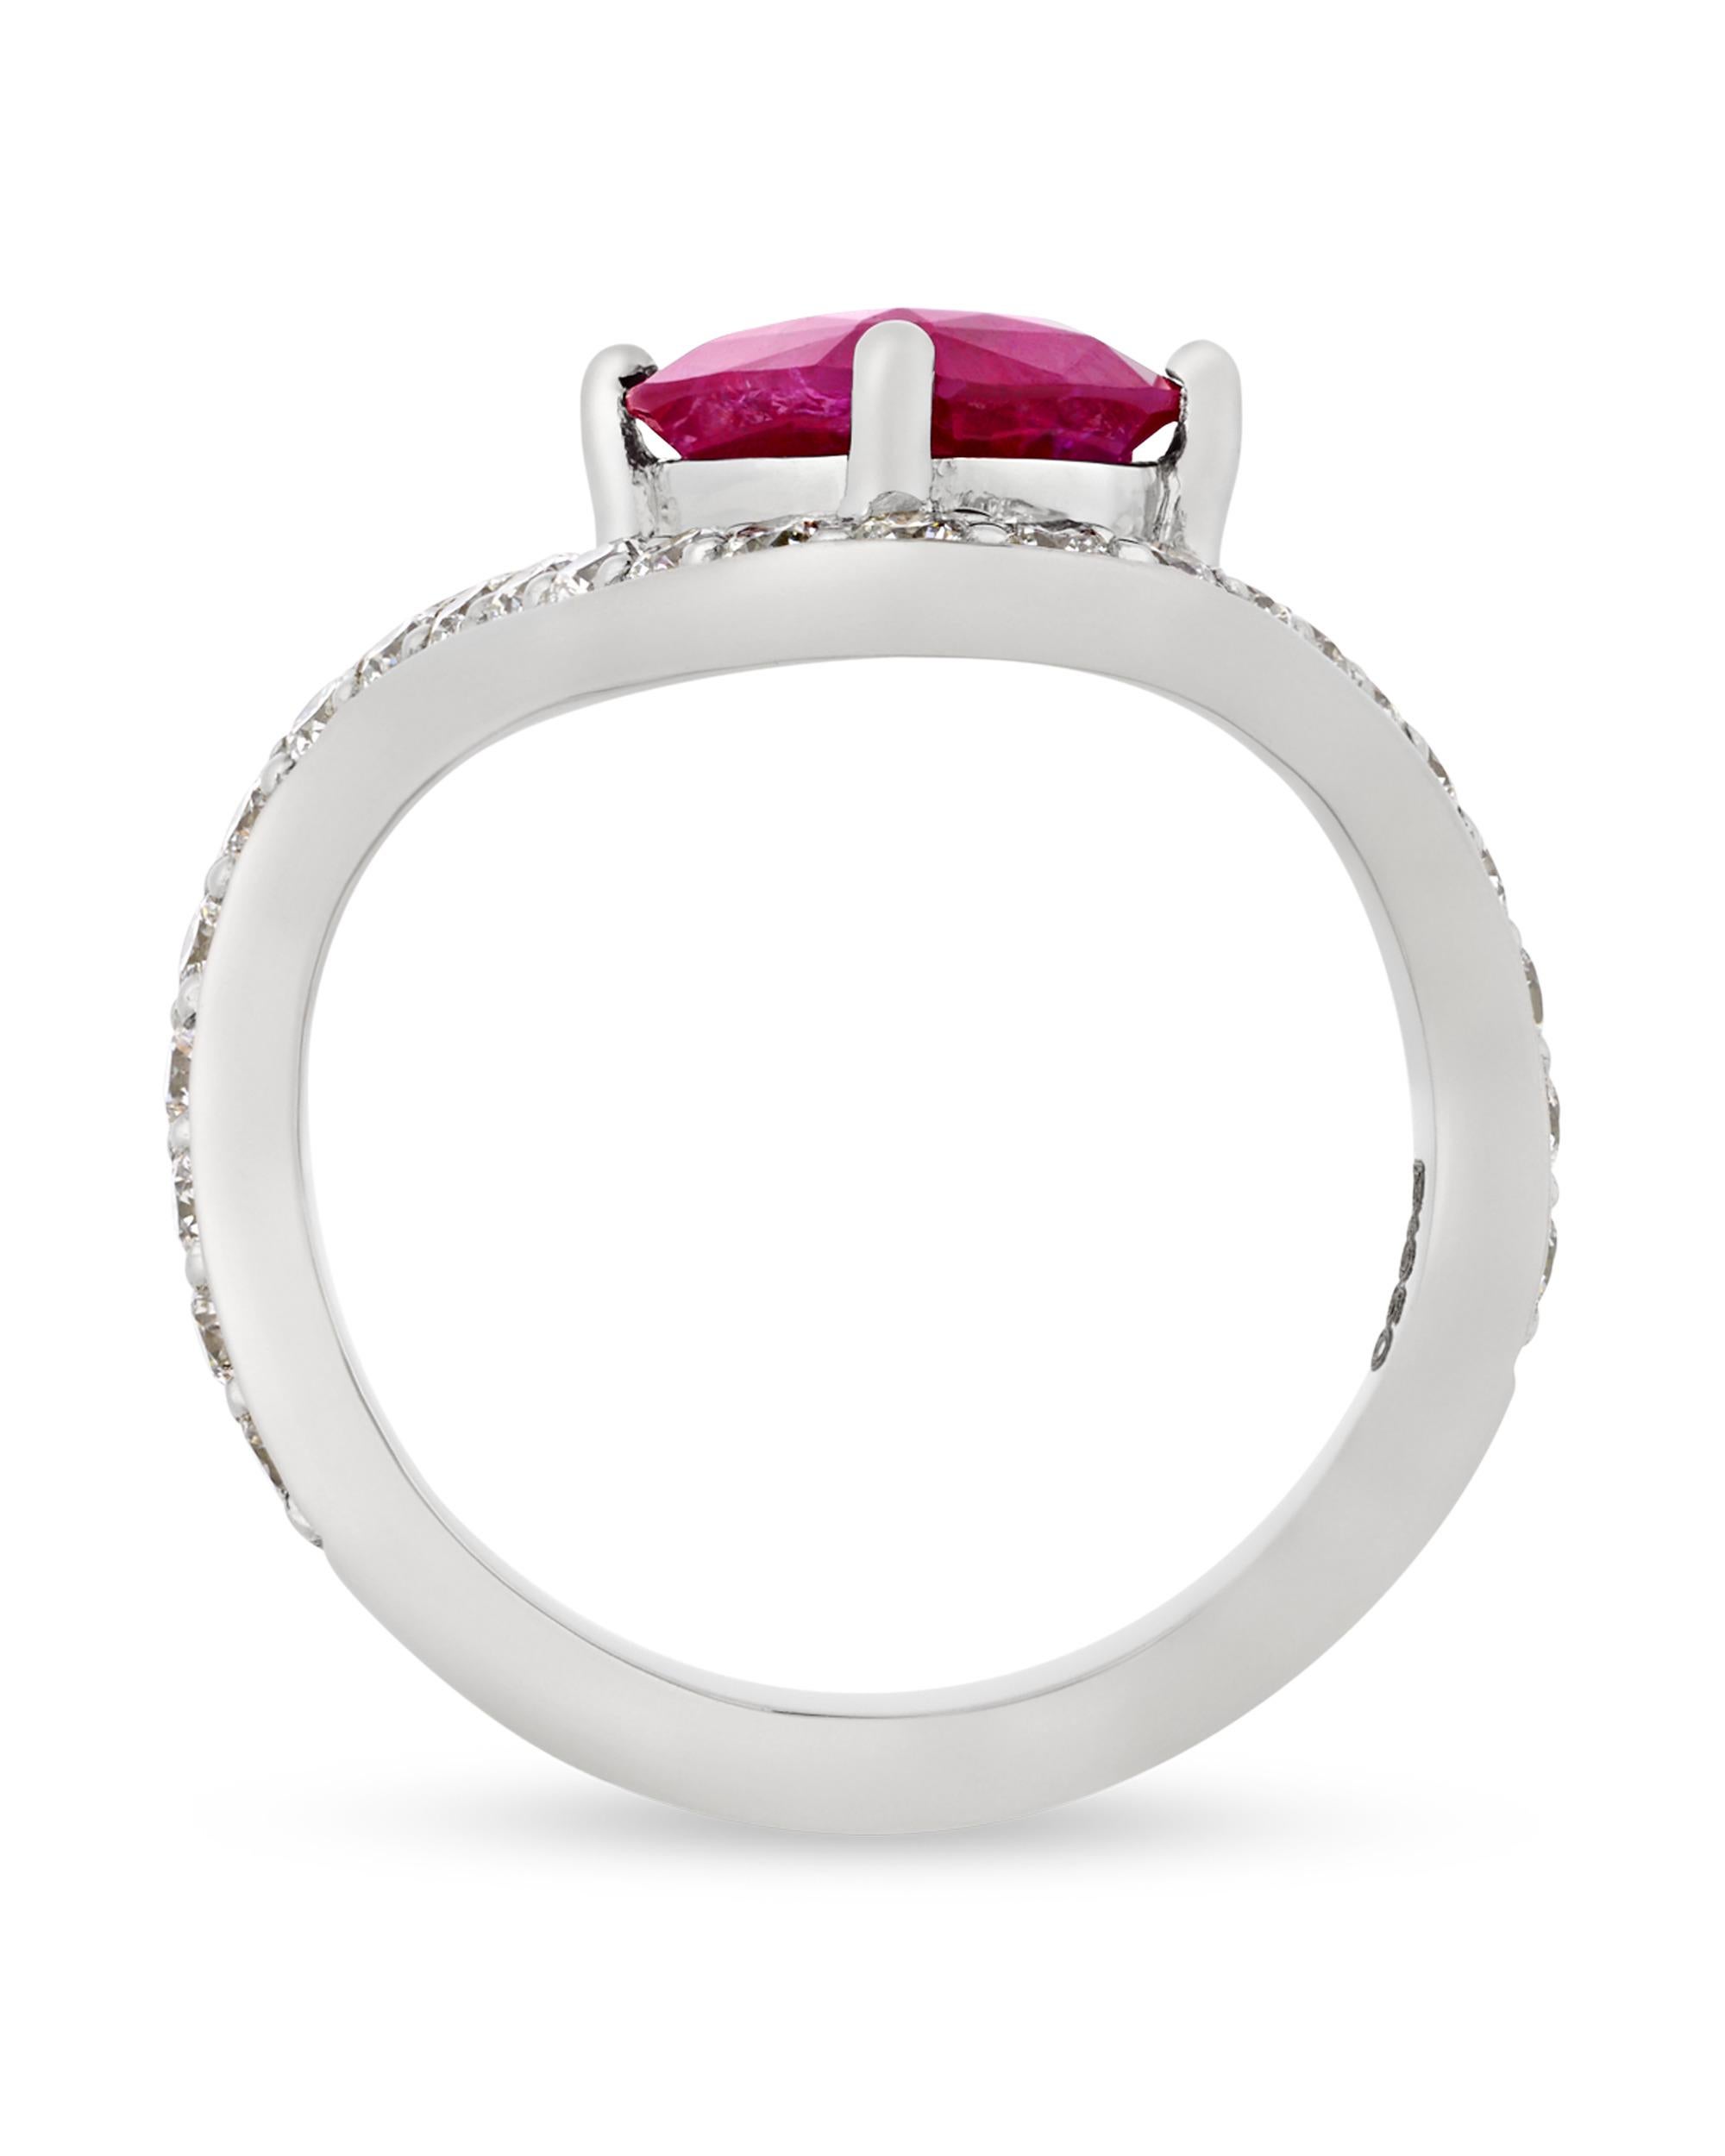 Chic and beautiful, this elegant ring features an exquisite untreated Burma ruby at the center. The radiant red gem weighs 2.39 carats and is certified by the American Gemological Laboratories as being completely unheated and originating from the